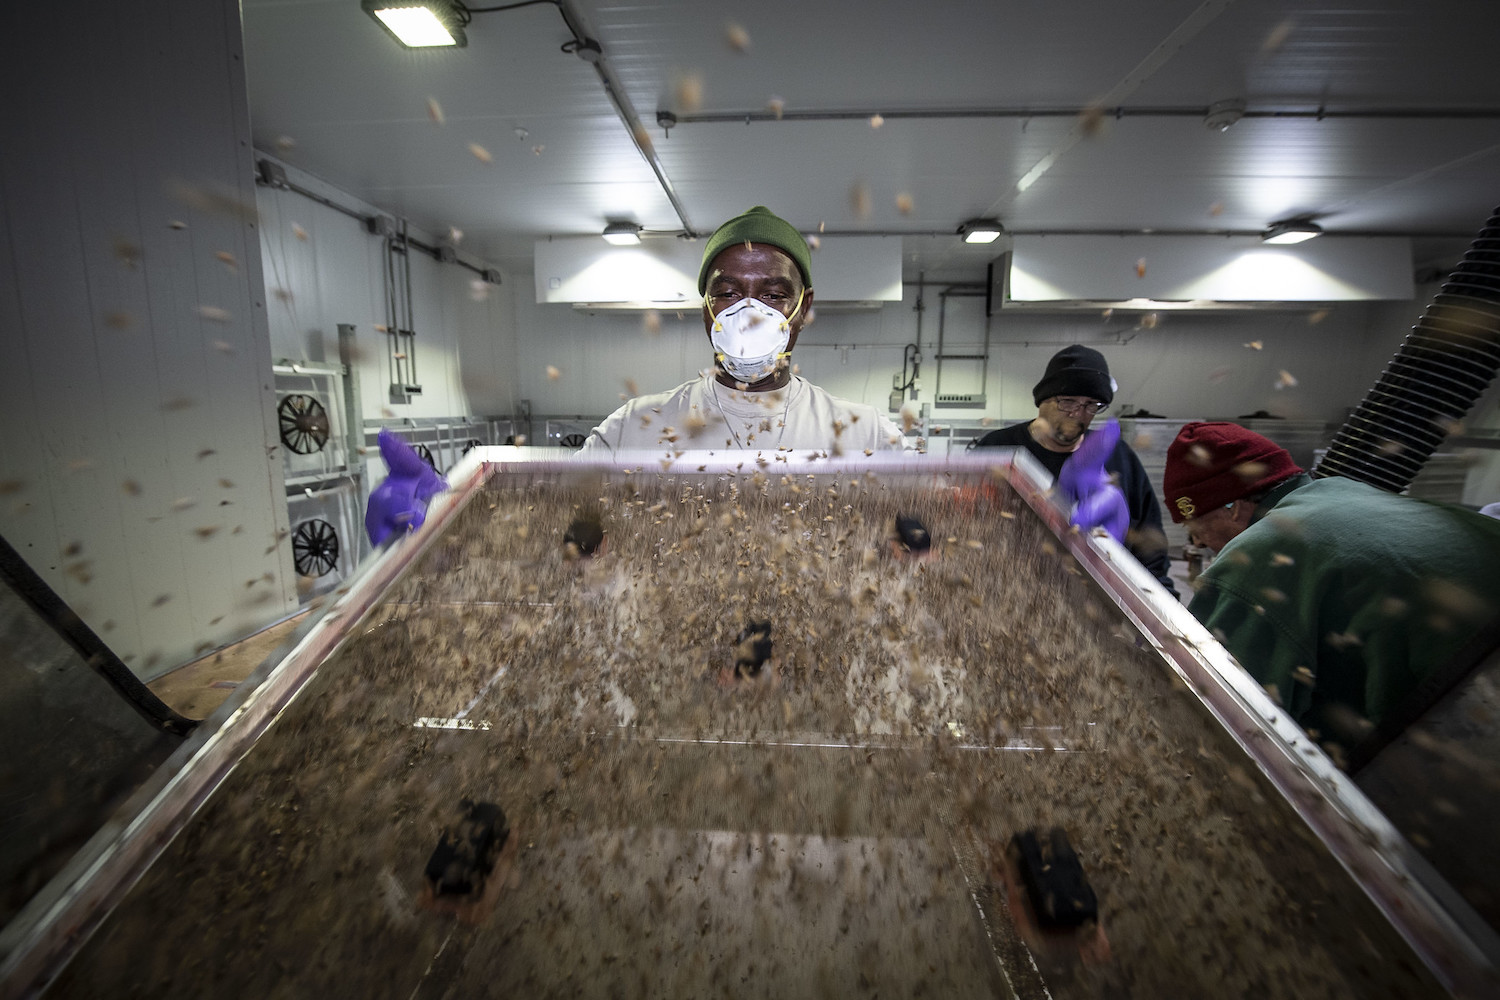 U.S. Department of Agriculture (USDA) Animal and Plant Health Inspection Service’s (APHIS) personnel collect the thousands of anesthetized Mediterranean Fruitflies on each screen at the Sarasota Sterile Insect Rearing Facility. Credit: USDA / Flickr, June 2019